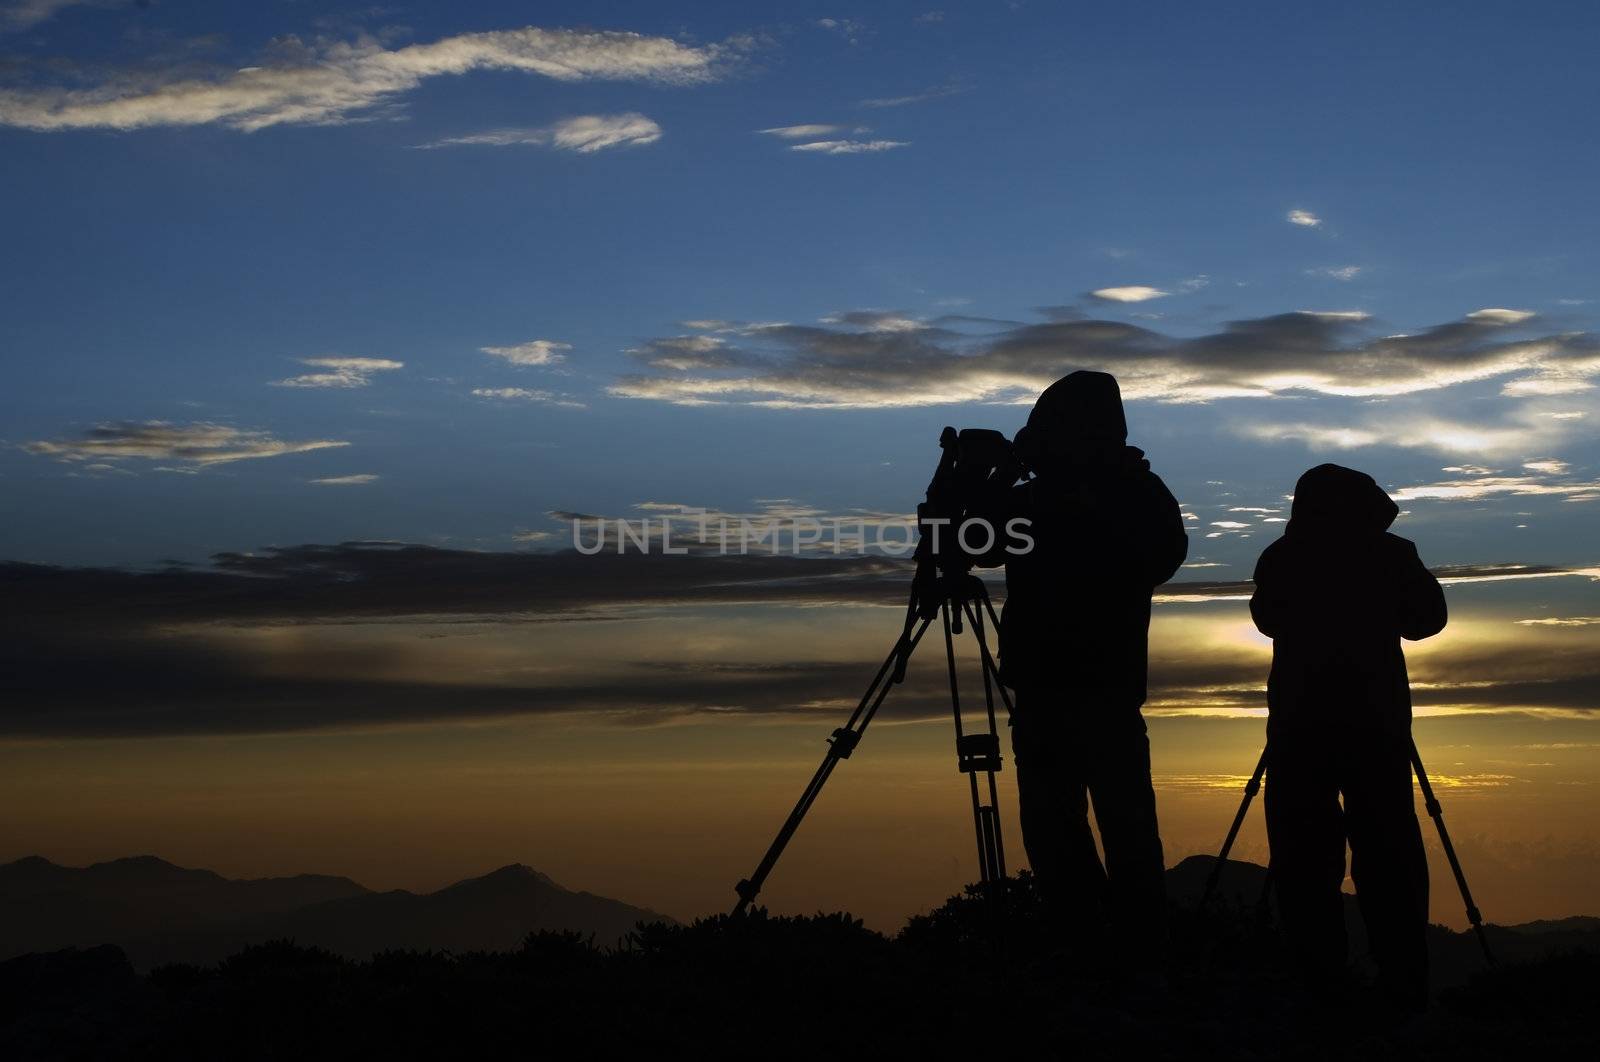 A couple of photophers in the morning sunrise.That's true love to take picture in cold morning!